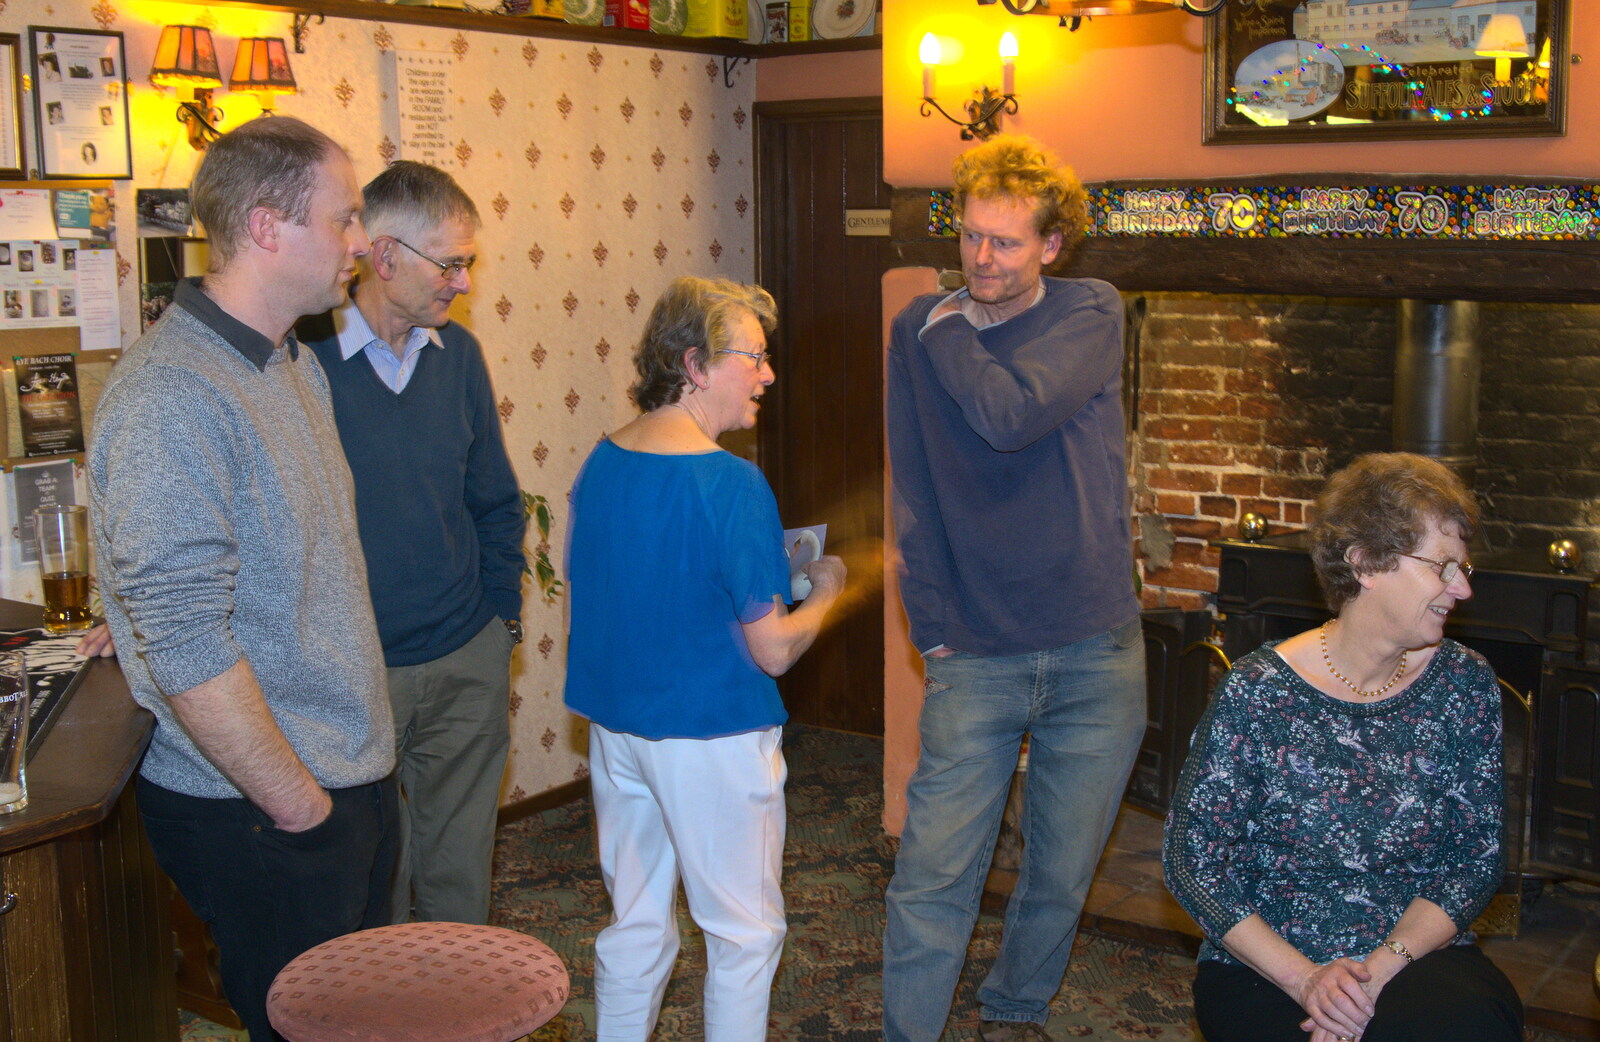 Paul, Uncle Mick and Wavy chat to Sylvia from Sylvia's 70th Birthday up the Swan Inn, Brome, Suffolk - 11th February 2017